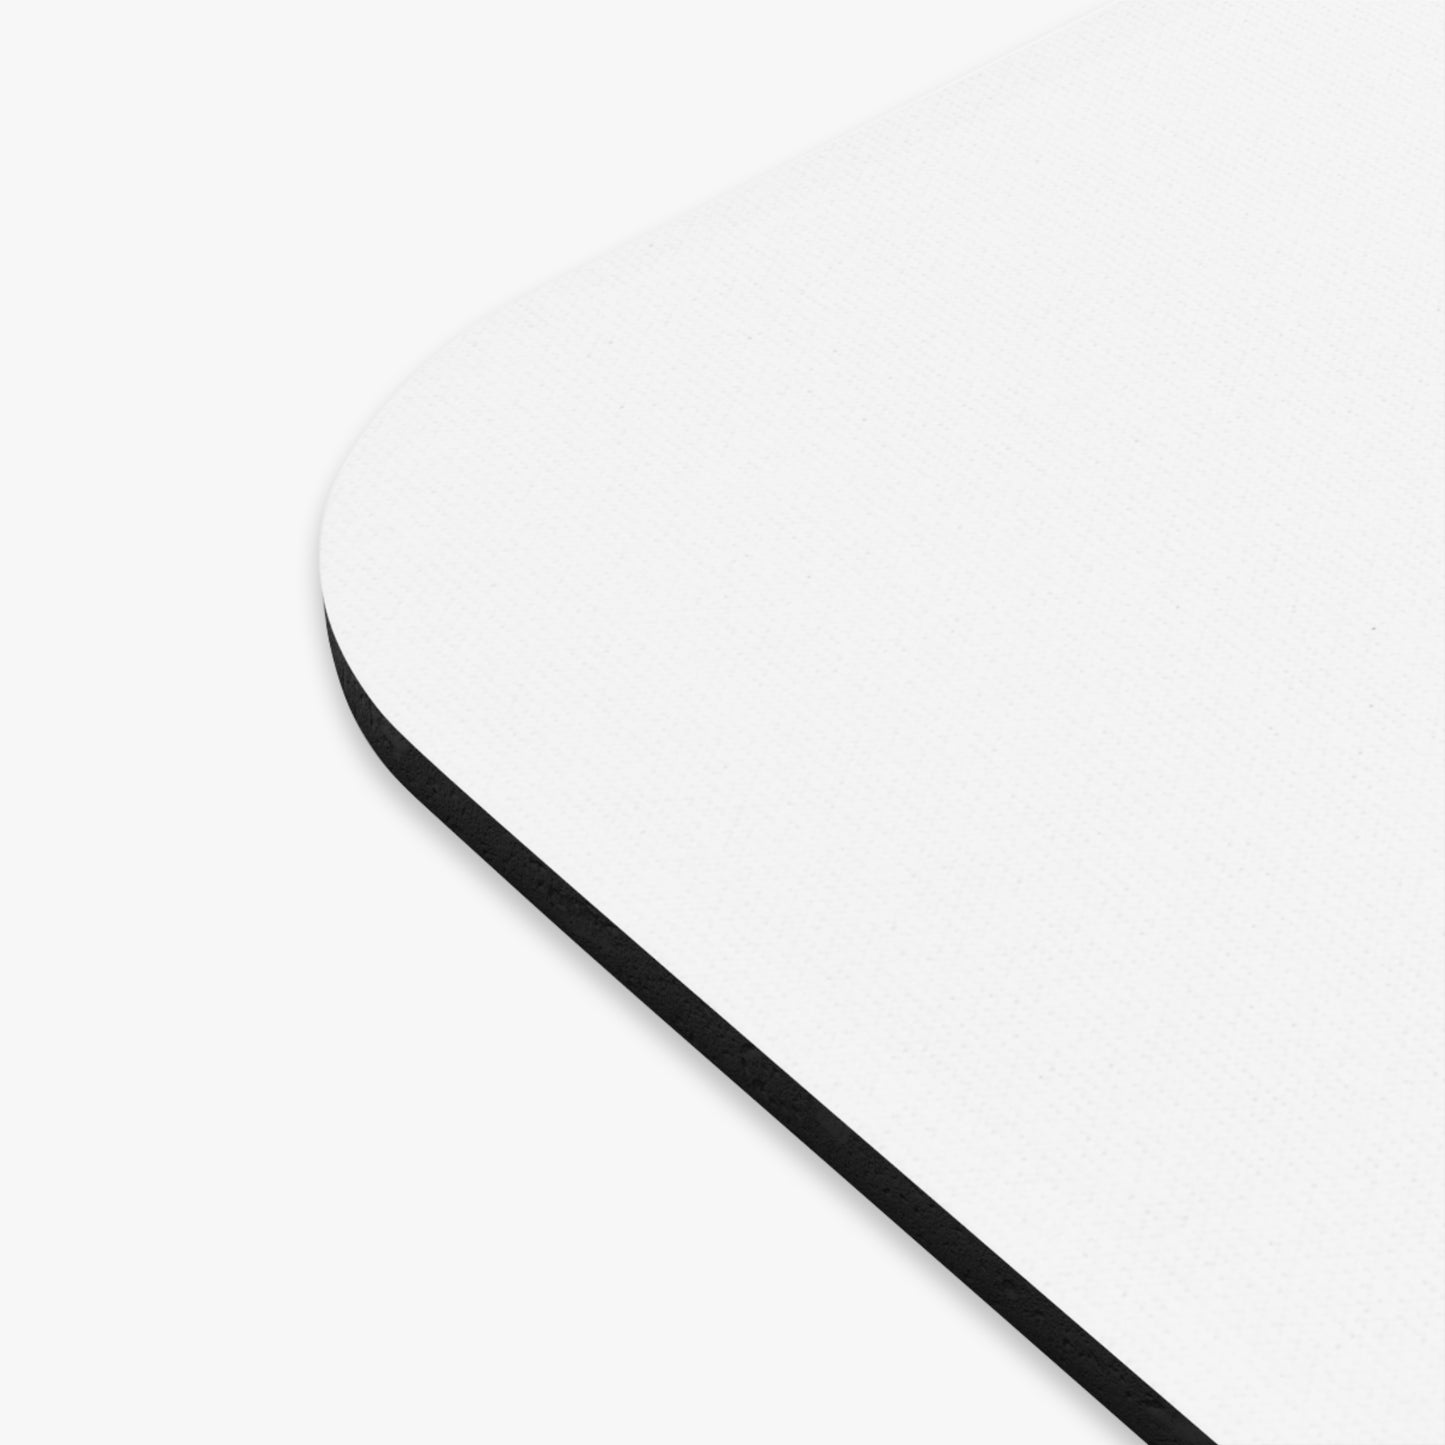 SBCRS Mouse Pad, Rectangle, White